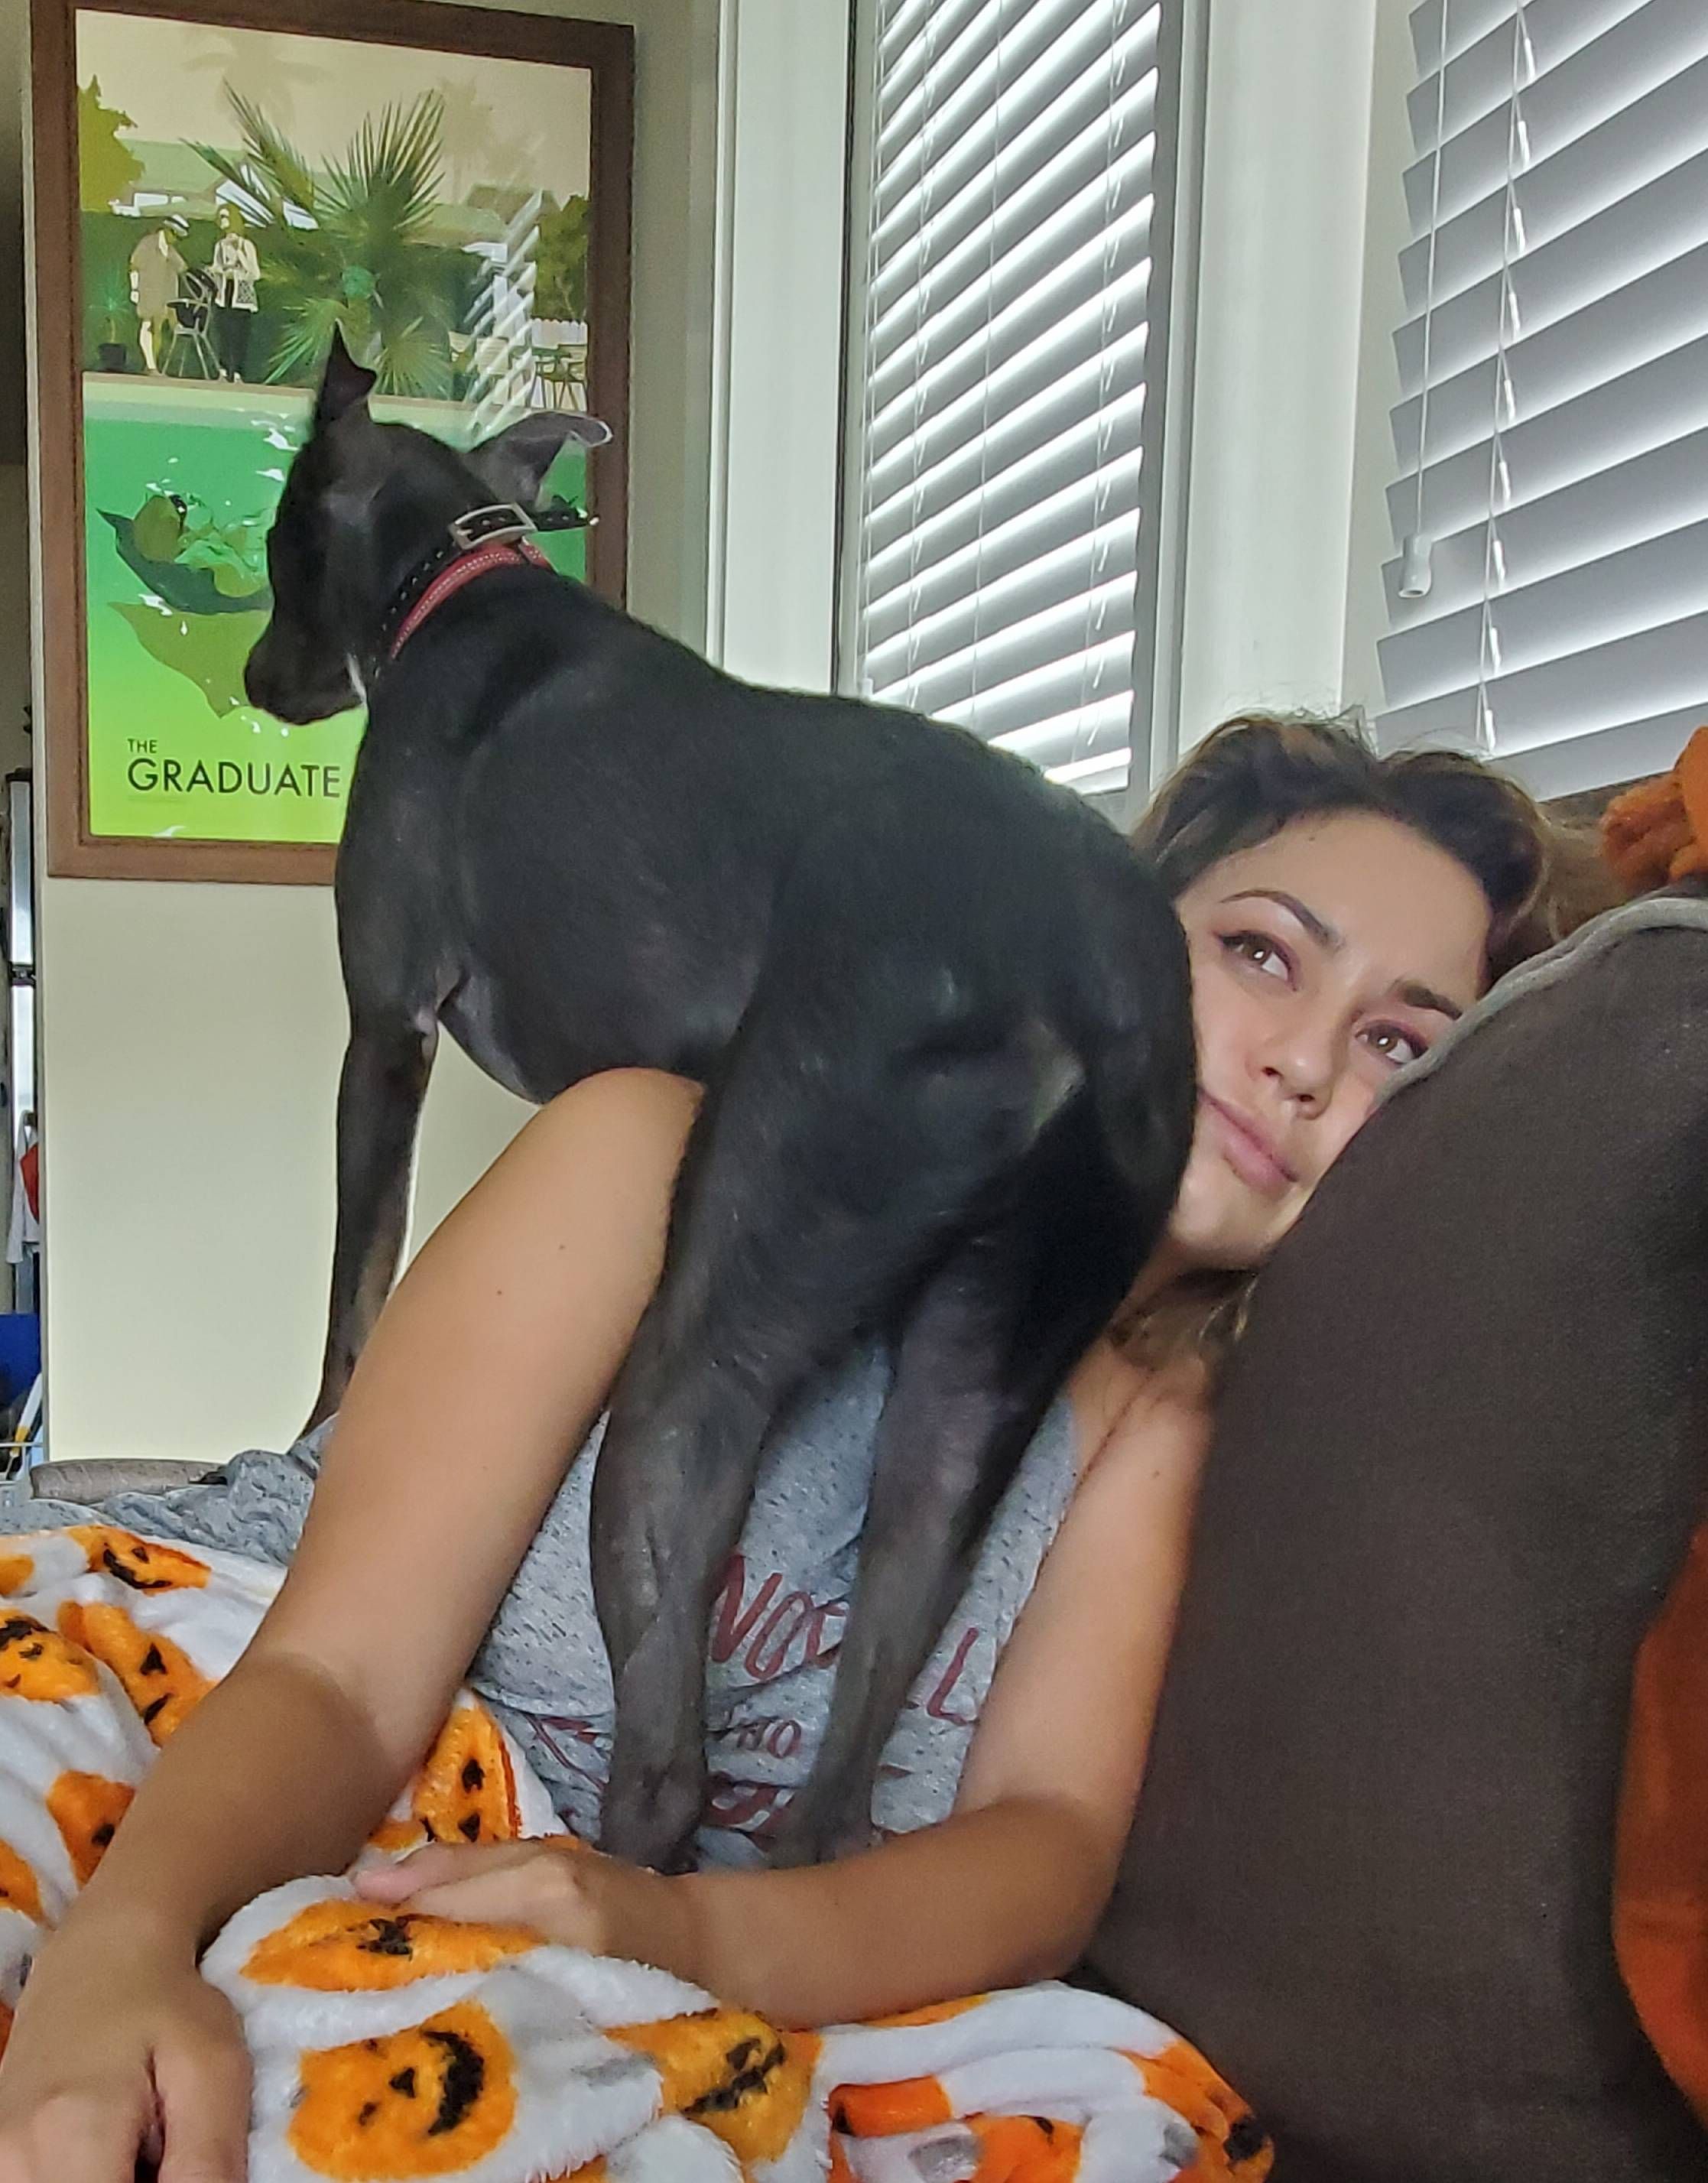 My roommates dog has no sense of personal space